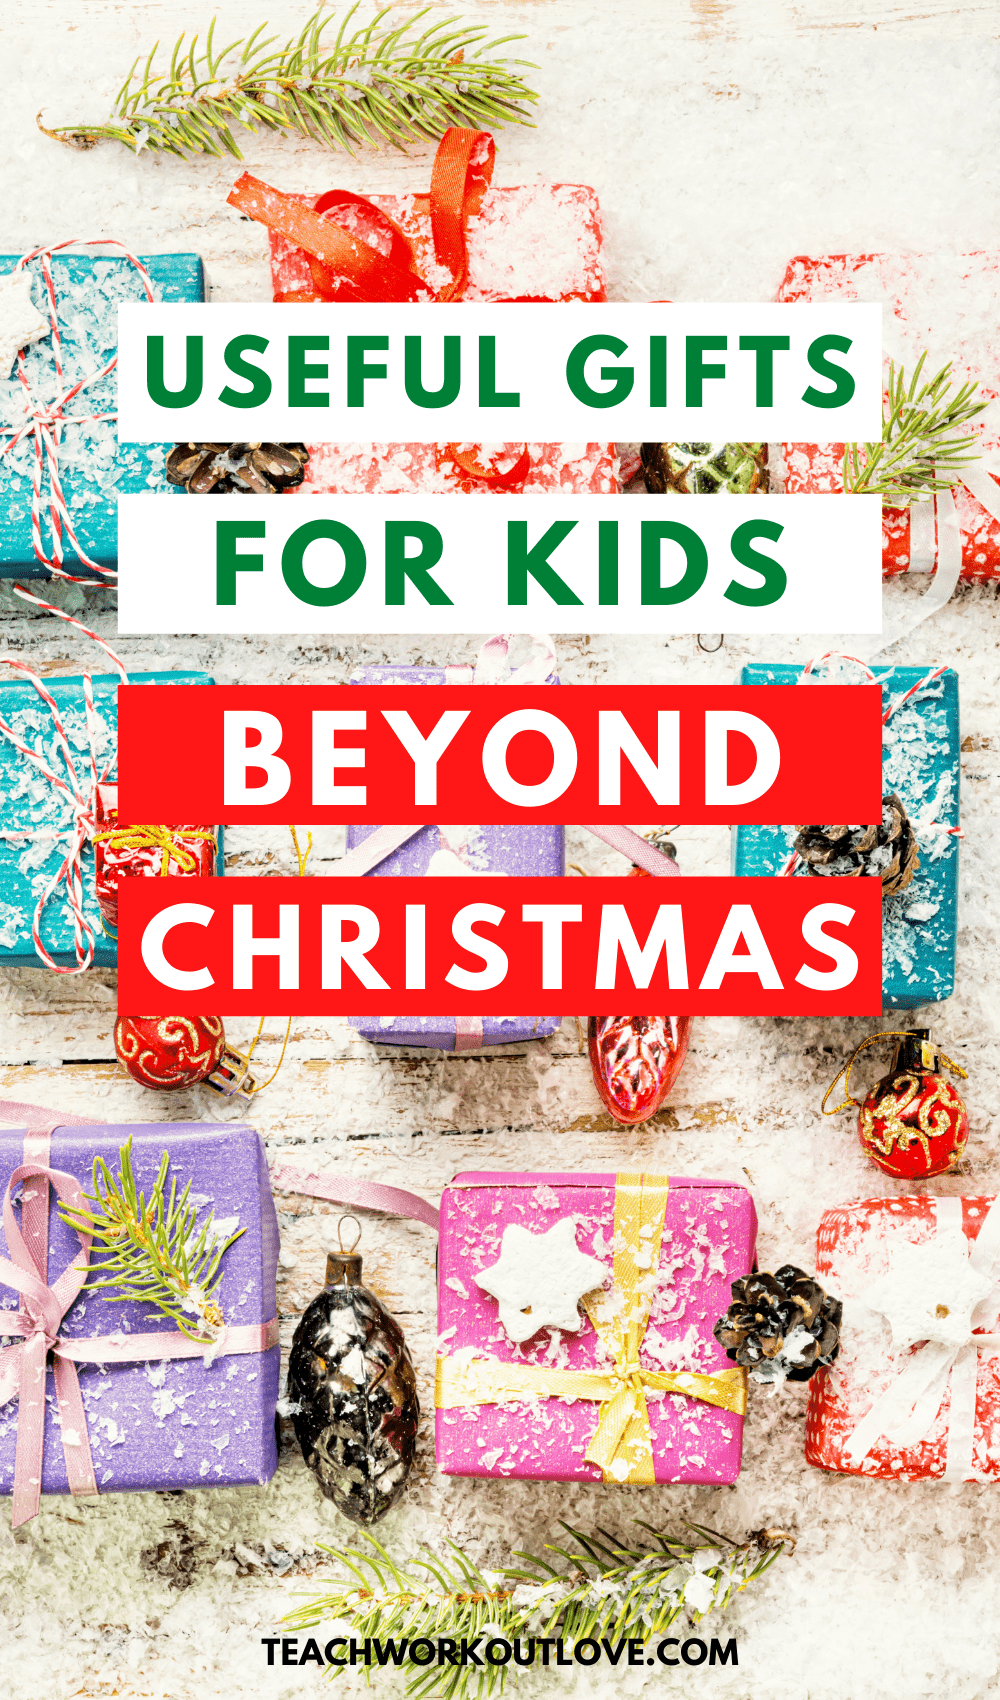 As a parent, we struggle with gifts! But what type of useful gifts can you get your child they actually use throughout the year and for years after that?